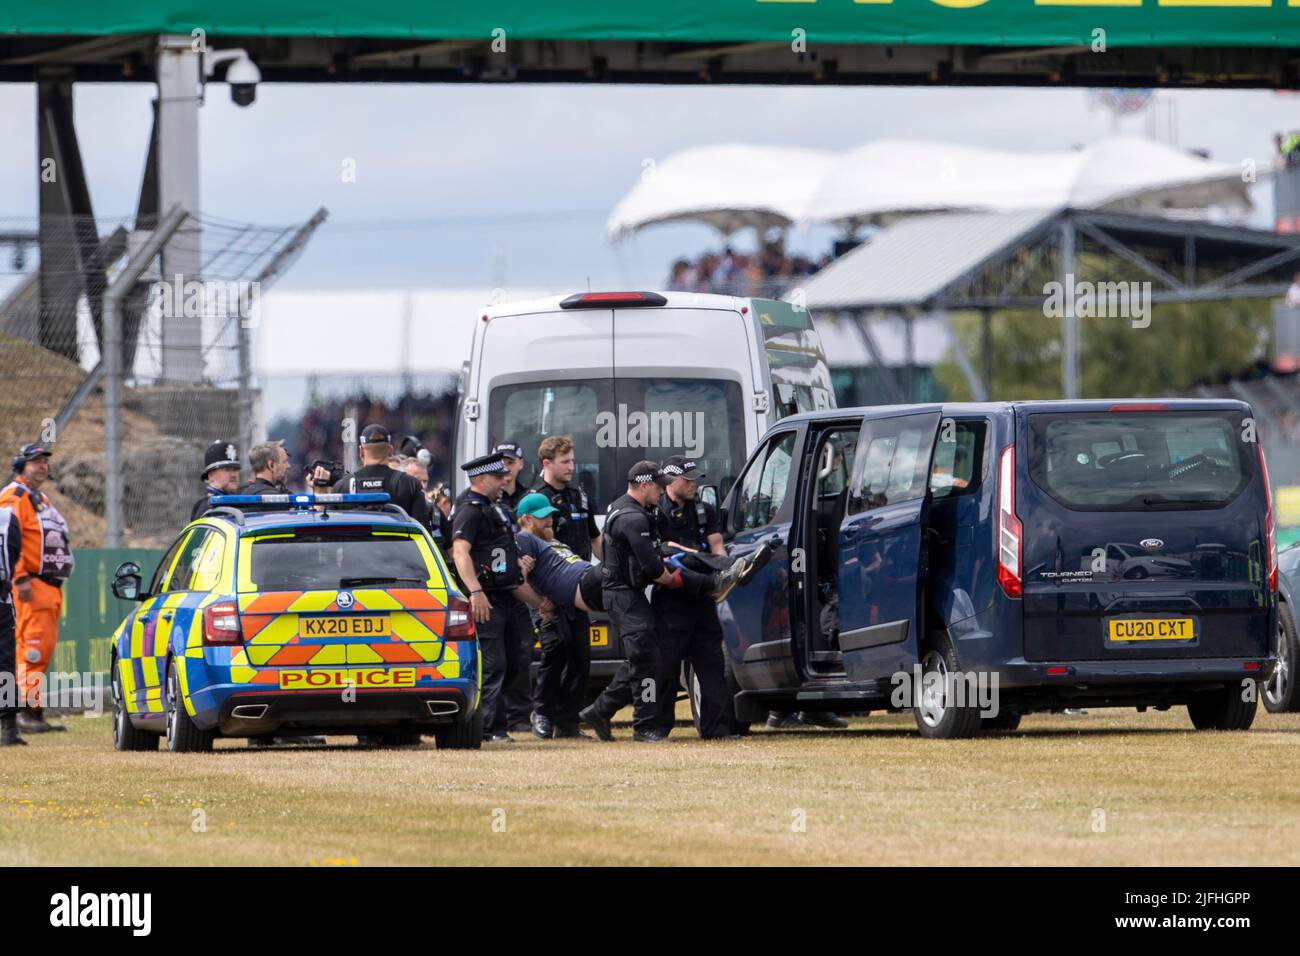 Silverstone, UK. 3rd July 2022, Silverstone Circuit, Silverstone, Northamptonshire, England: British F1 Grand Prix, Race day: A protester is loaded into a Police van after running onto the track on the opening lap Credit: Action Plus Sports Images/Alamy Live News Stock Photo